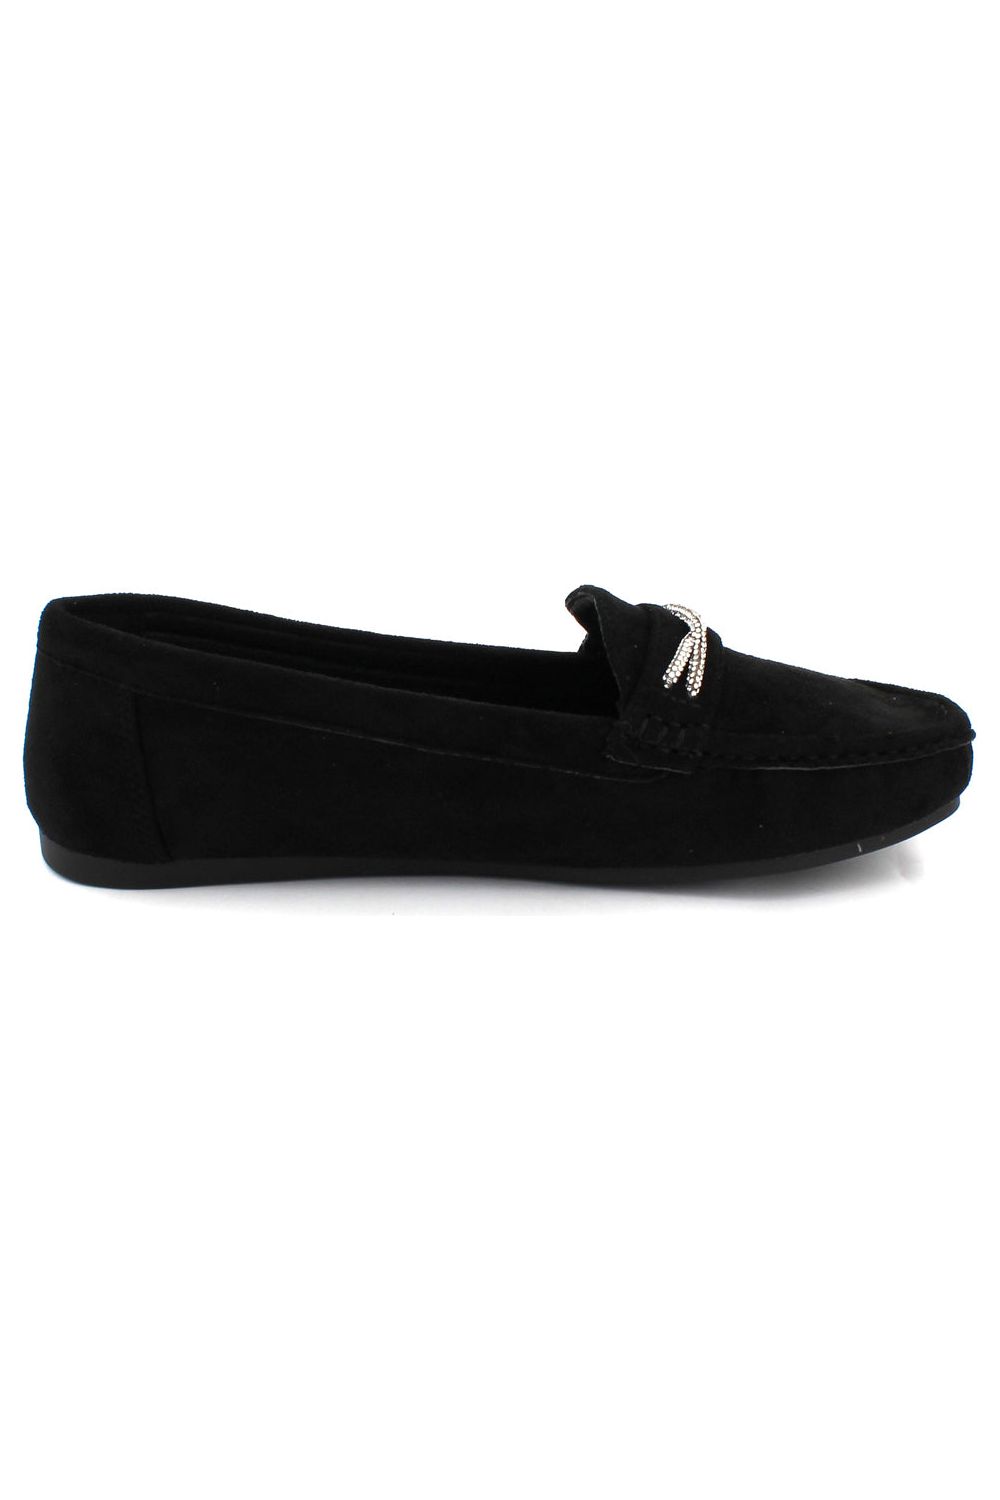 Comfort Casual Office Work Loafer Moccasins Closed Toe Flat Slip-On L8027